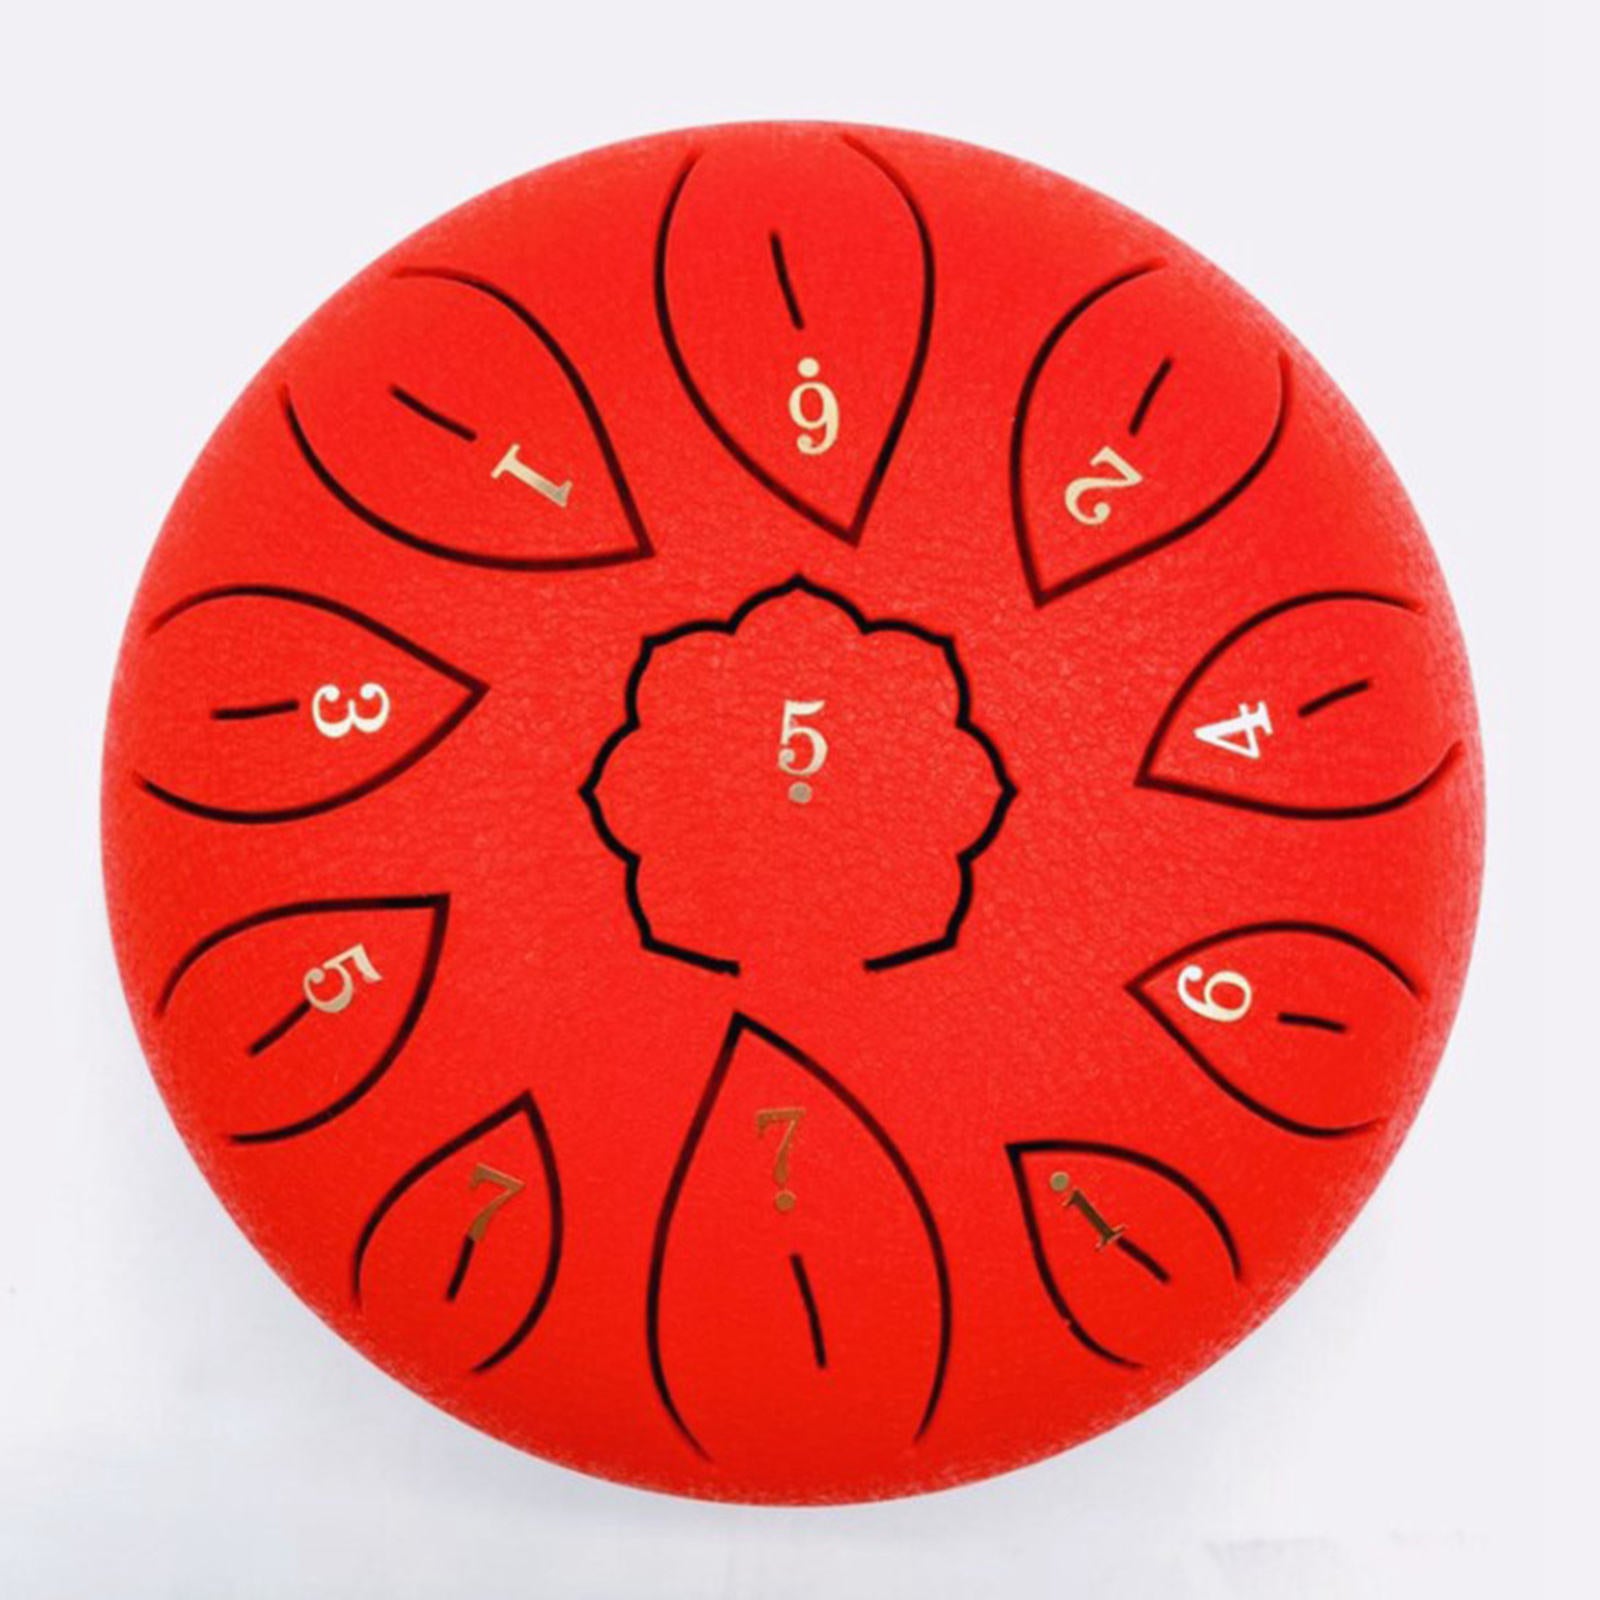 11 Notes 6" Steel Tongue Drum Hand Pan w/ Music Book Notes Stickers Gift red